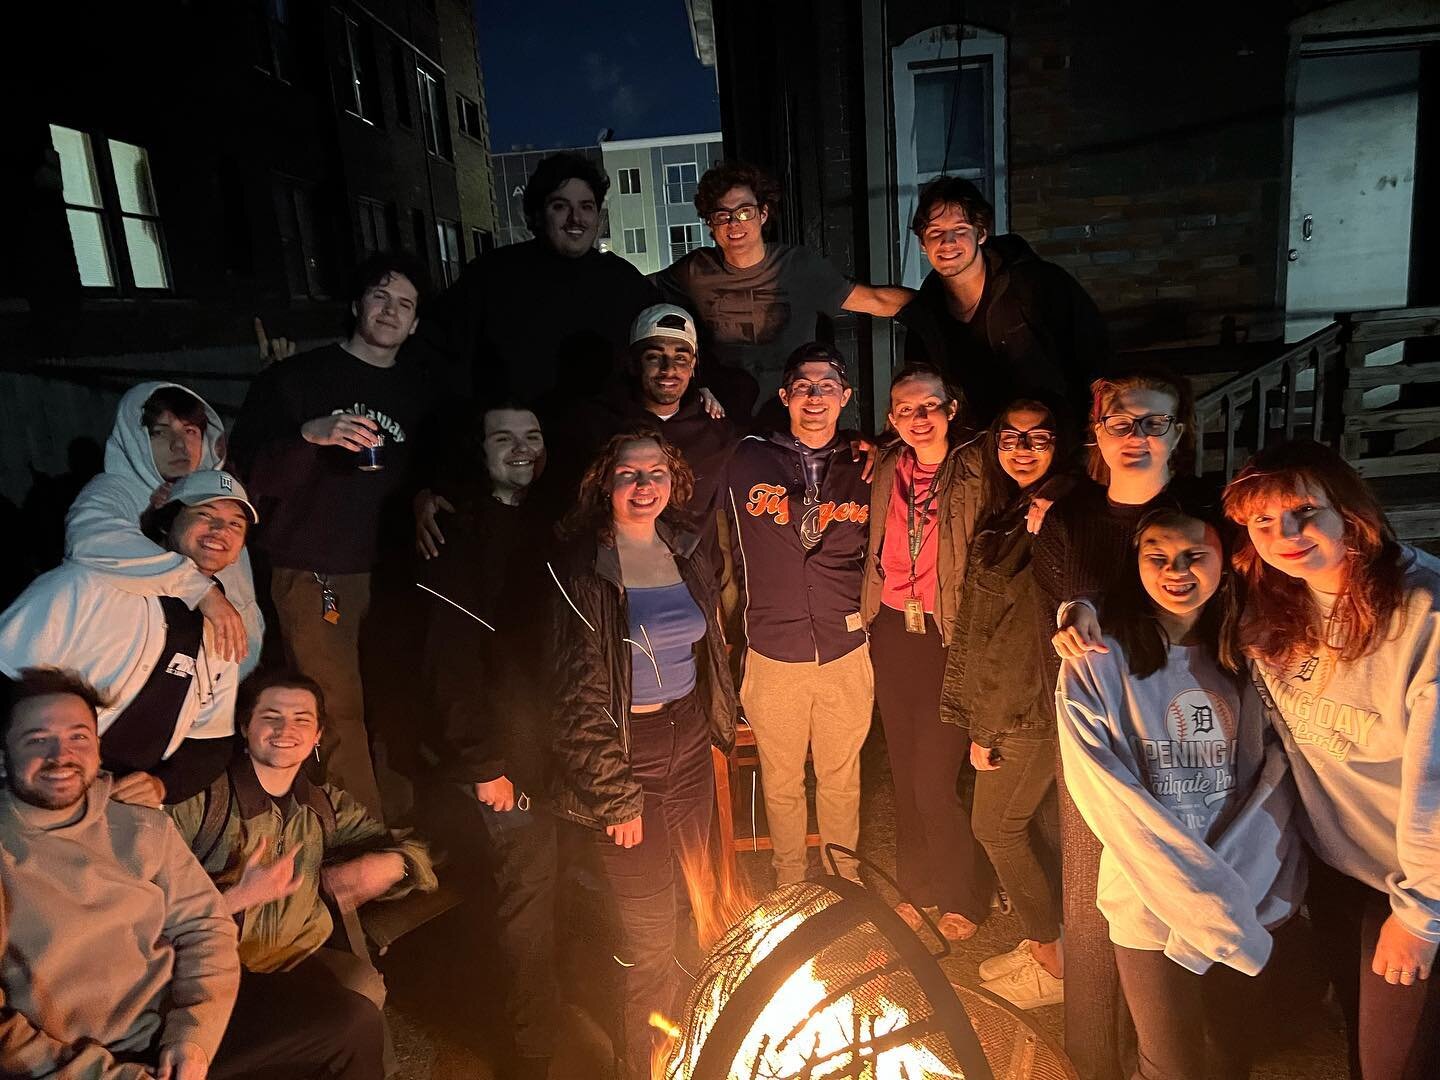 Our brothers had a great time enjoying a beautiful night with a nice bonfire and making s&rsquo;mores with the ladies of @aephiwsu!